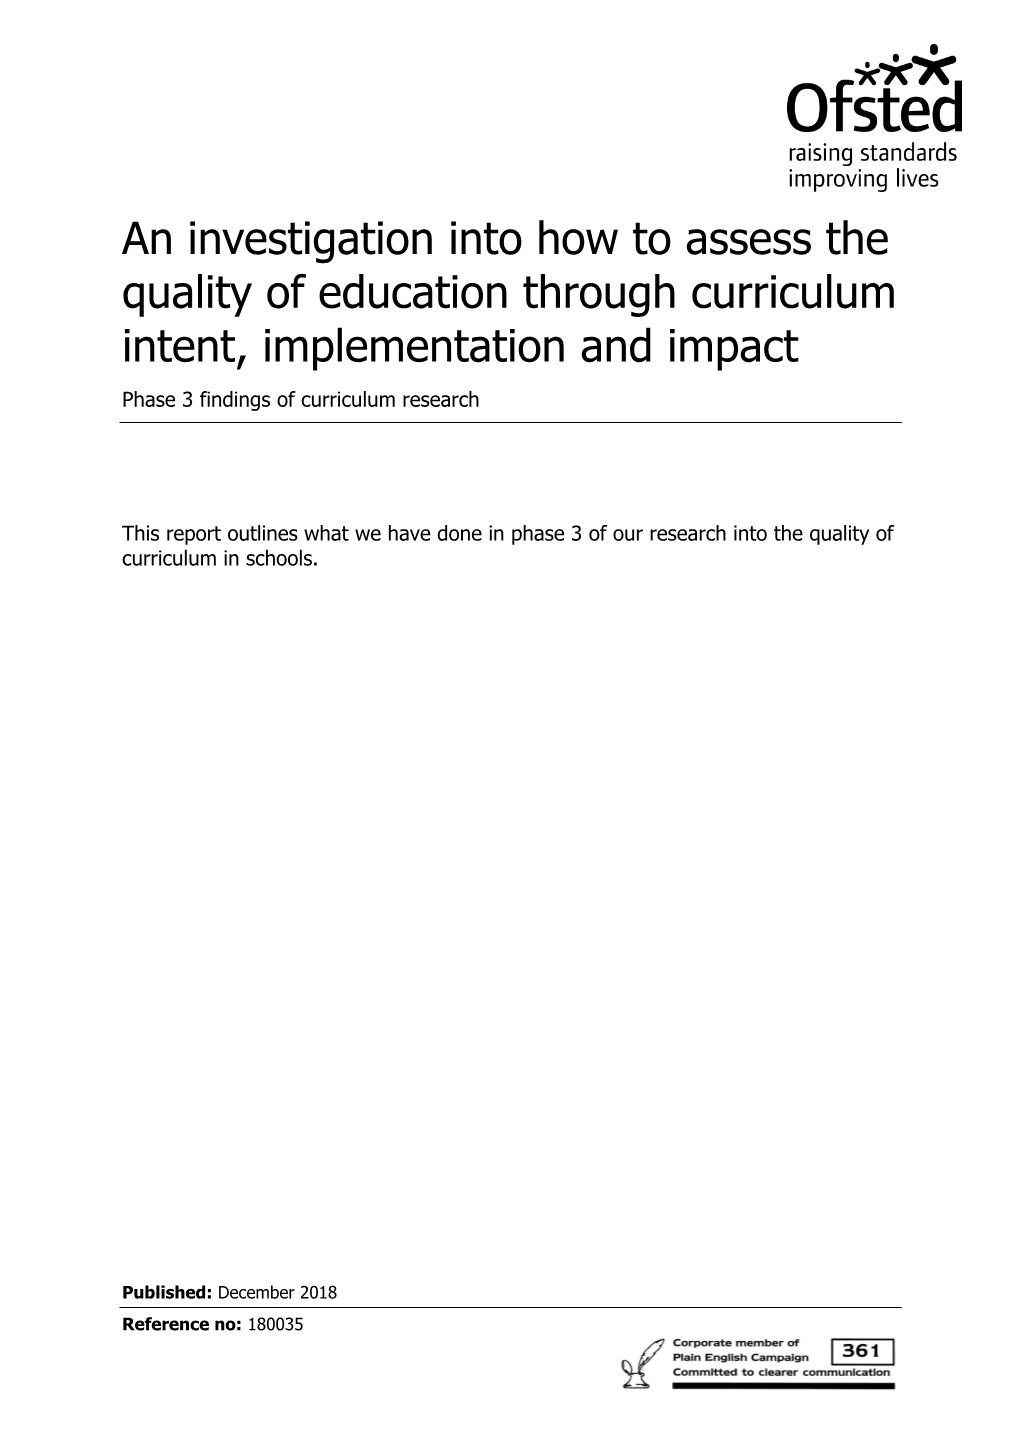 Curriculum Research: Assessing Intent, Implementation and Impact